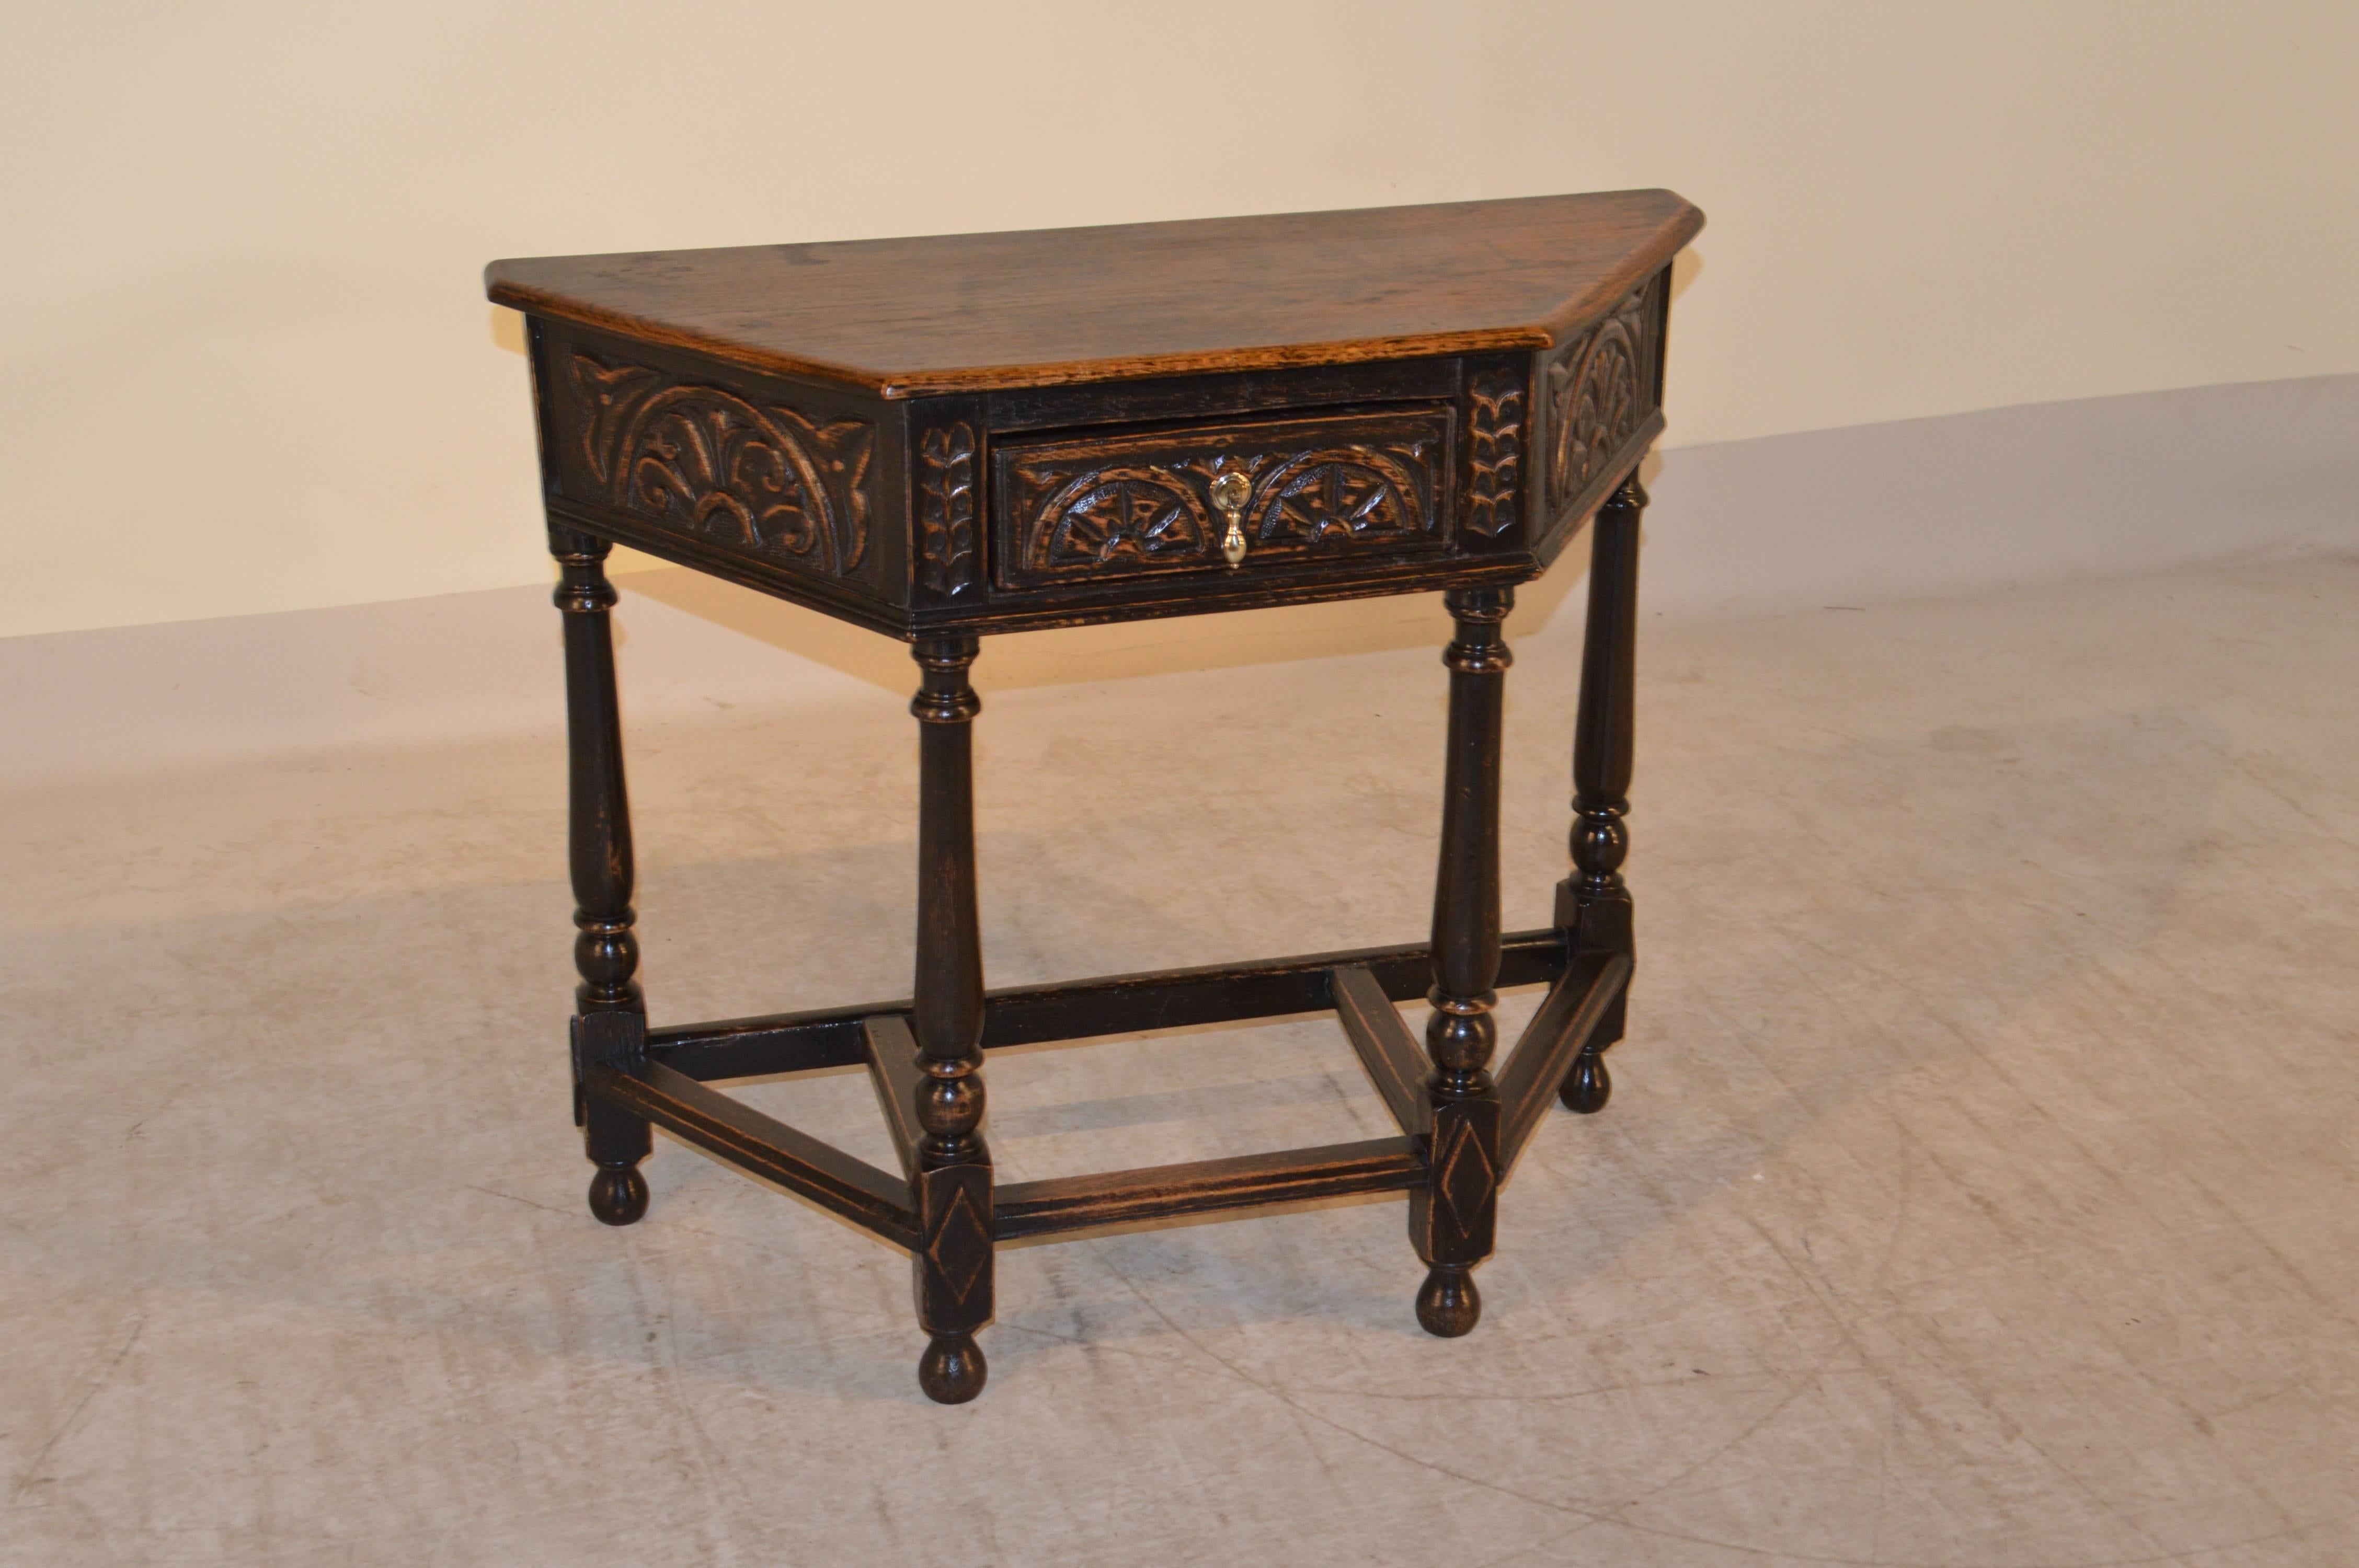 18th century English oak five-sided table with a beveled edge around the top following down to a carved apron which contains a single drawer. The piece is supported on turned legs, joined by stretchers and raised on turned feet.